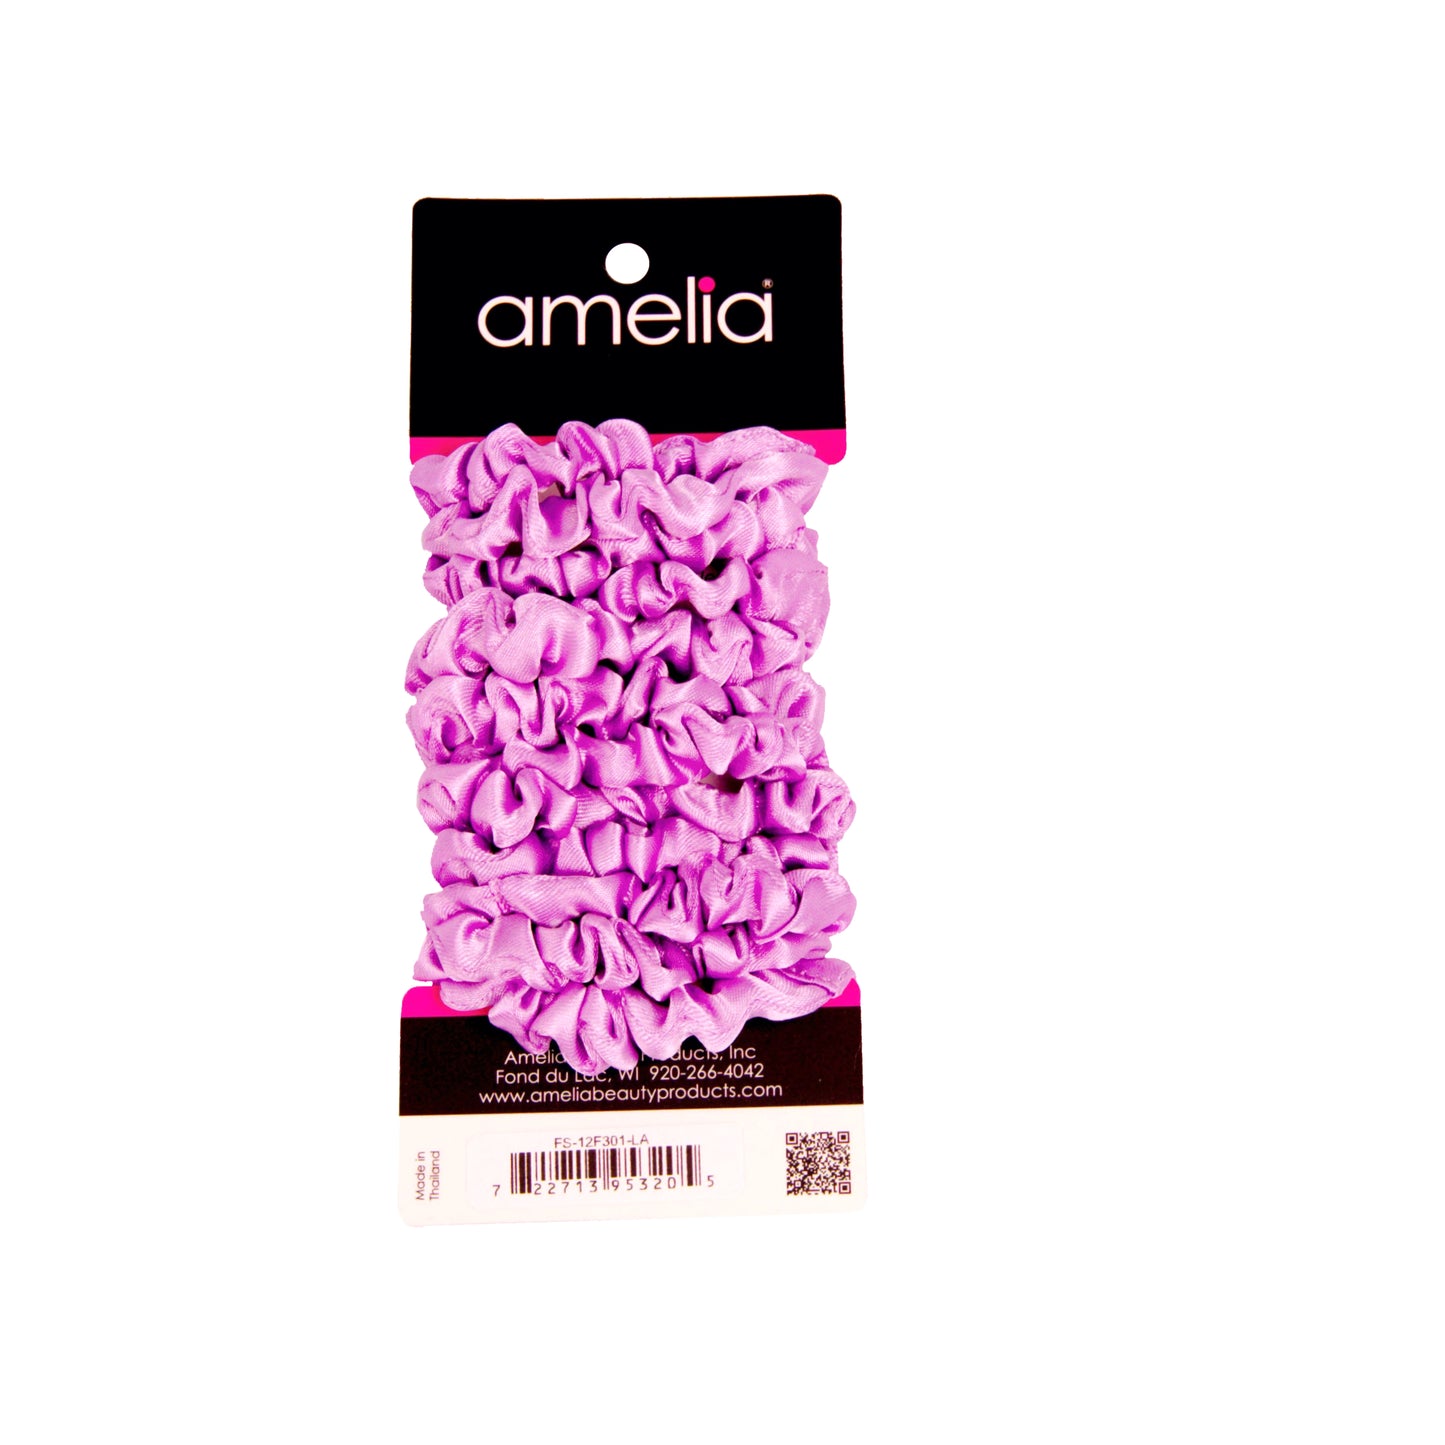 Amelia Beauty, Lavender Satin Scrunchies, 2.25in Diameter, Gentle on Hair, Strong Hold, No Snag, No Dents or Creases. 12 Pack